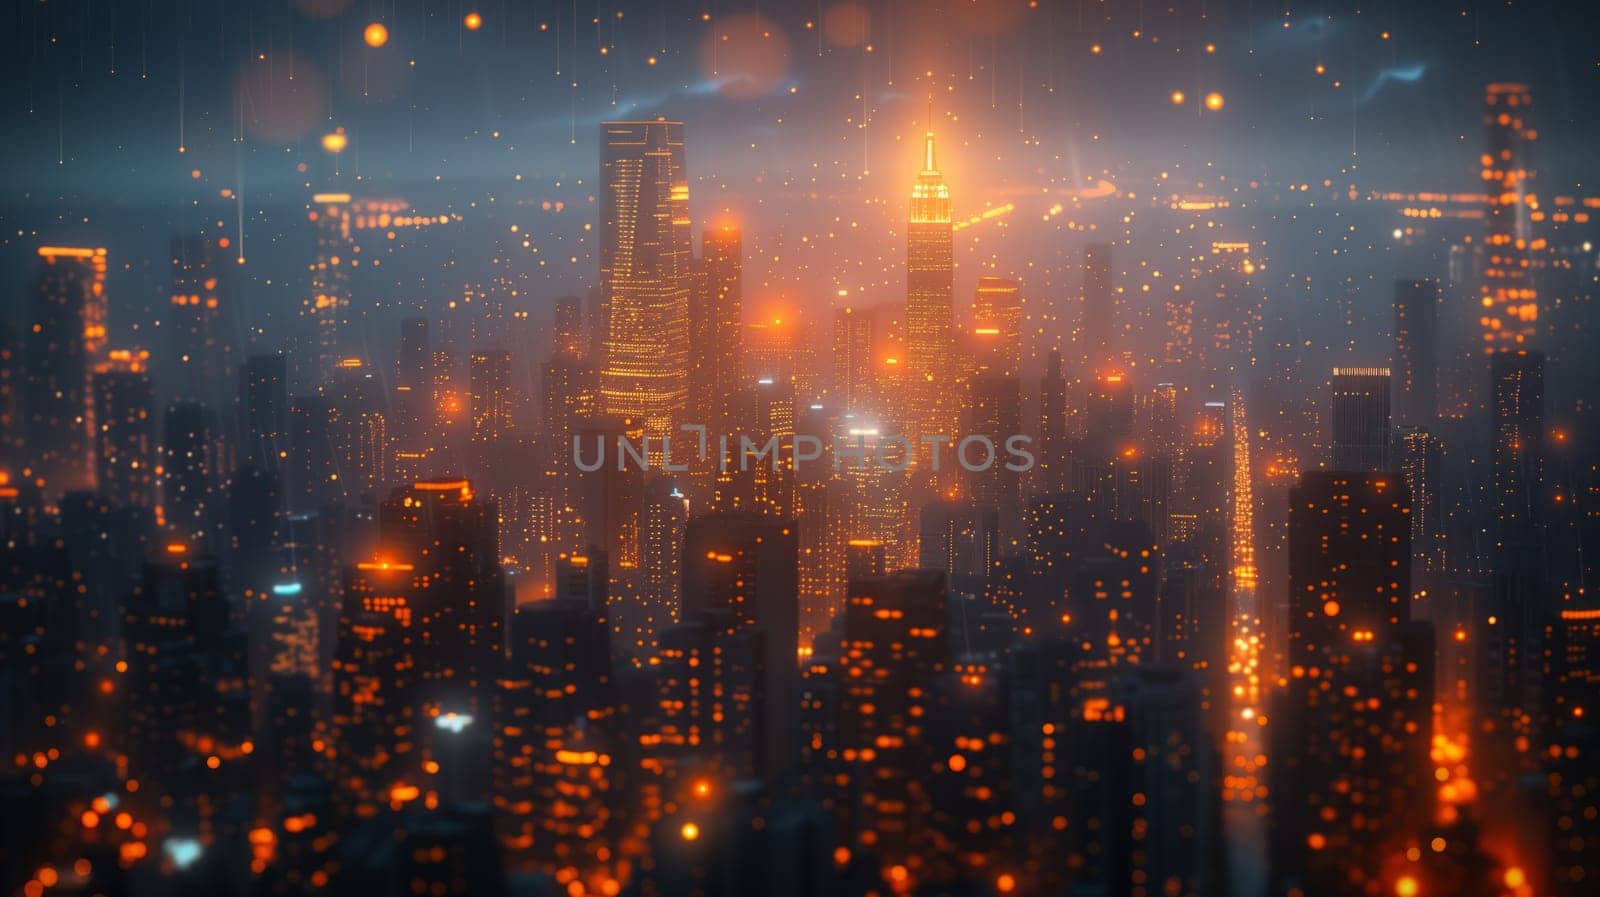 A mesmerizing aerial view of a metropolis at night with towering skyscrapers, illuminated buildings, and clouds floating in the atmospheric sky